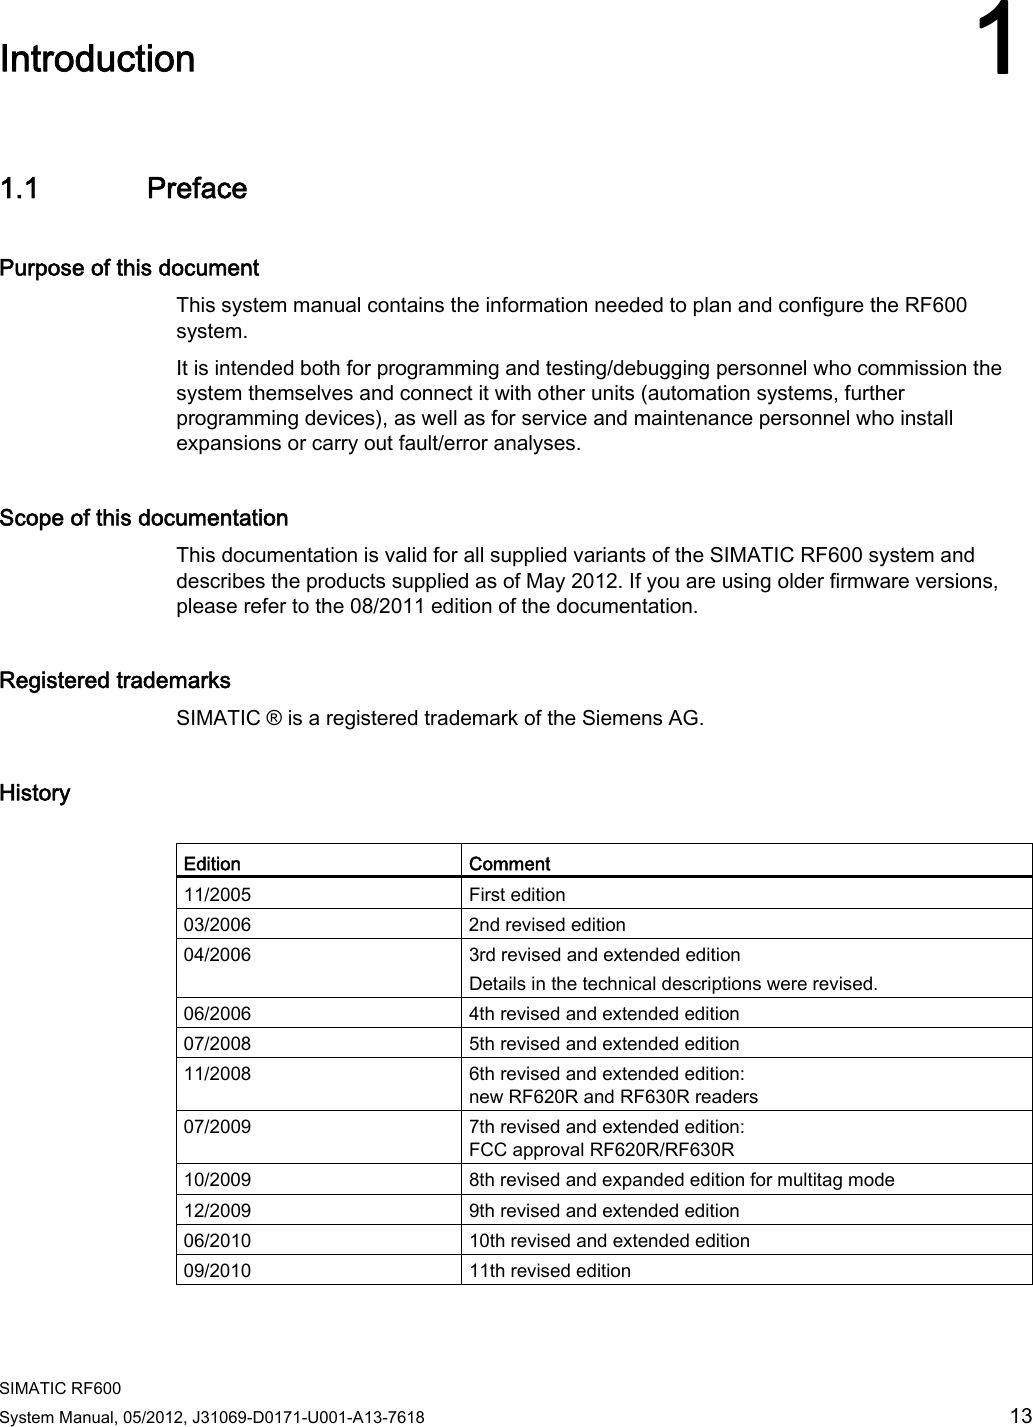  SIMATIC RF600 System Manual, 05/2012, J31069-D0171-U001-A13-7618  13 Introduction 11.1 Preface Purpose of this document This system manual contains the information needed to plan and configure the RF600 system. It is intended both for programming and testing/debugging personnel who commission the system themselves and connect it with other units (automation systems, further programming devices), as well as for service and maintenance personnel who install expansions or carry out fault/error analyses. Scope of this documentation This documentation is valid for all supplied variants of the SIMATIC RF600 system and describes the products supplied as of May 2012. If you are using older firmware versions, please refer to the 08/2011 edition of the documentation. Registered trademarks SIMATIC ® is a registered trademark of the Siemens AG. History  Edition  Comment 11/2005  First edition 03/2006  2nd revised edition 04/2006  3rd revised and extended edition Details in the technical descriptions were revised. 06/2006  4th revised and extended edition 07/2008  5th revised and extended edition 11/2008  6th revised and extended edition: new RF620R and RF630R readers 07/2009  7th revised and extended edition: FCC approval RF620R/RF630R 10/2009  8th revised and expanded edition for multitag mode 12/2009  9th revised and extended edition 06/2010  10th revised and extended edition 09/2010  11th revised edition 